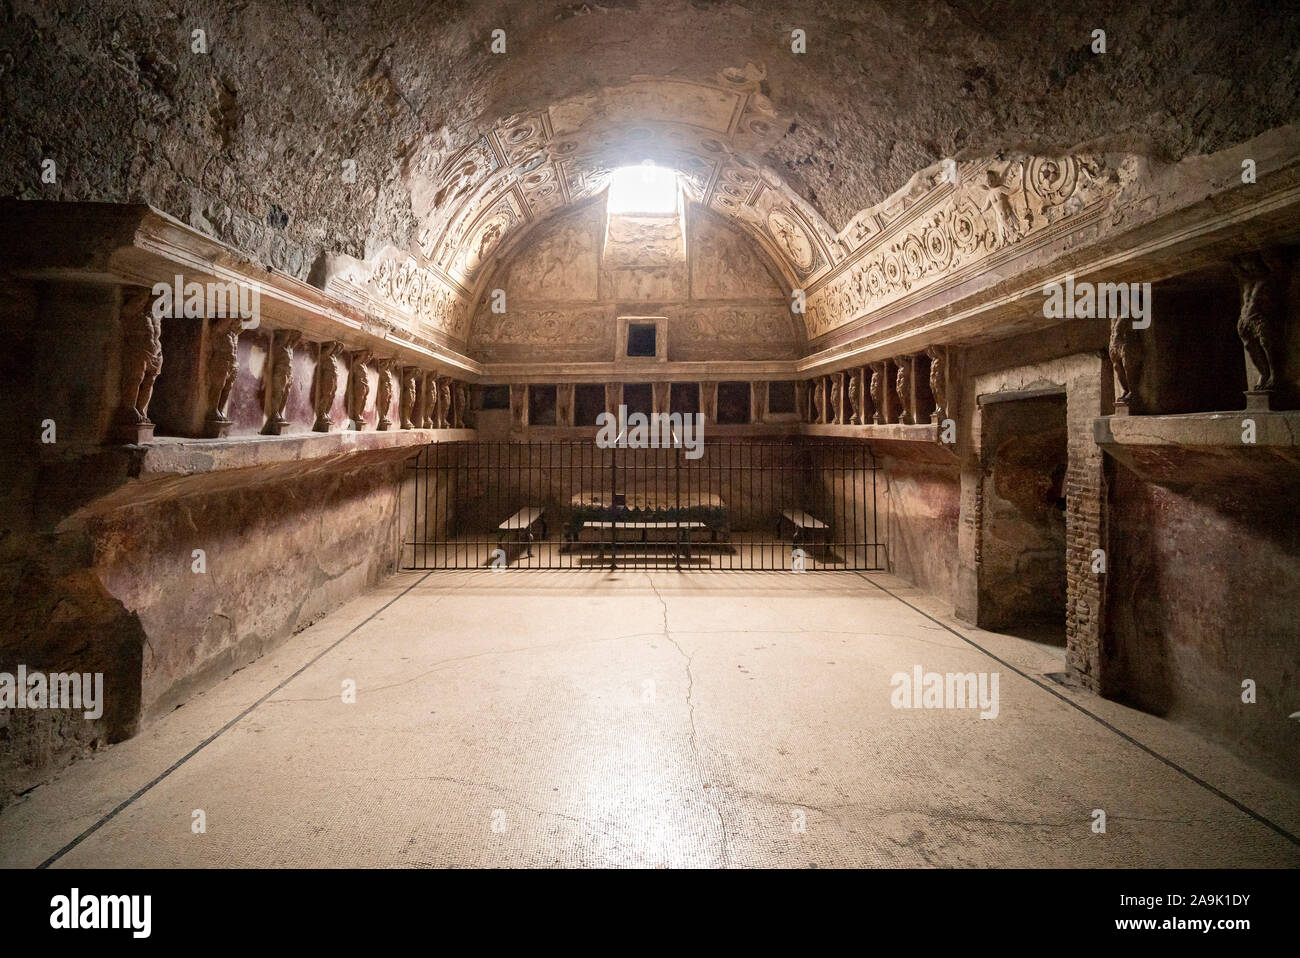 Pompei. Italy. Archaeological site of Pompeii. Tepidarium in the Terme del Foro (Forum Baths), the walls are lined with niches for ointments and towel Stock Photo